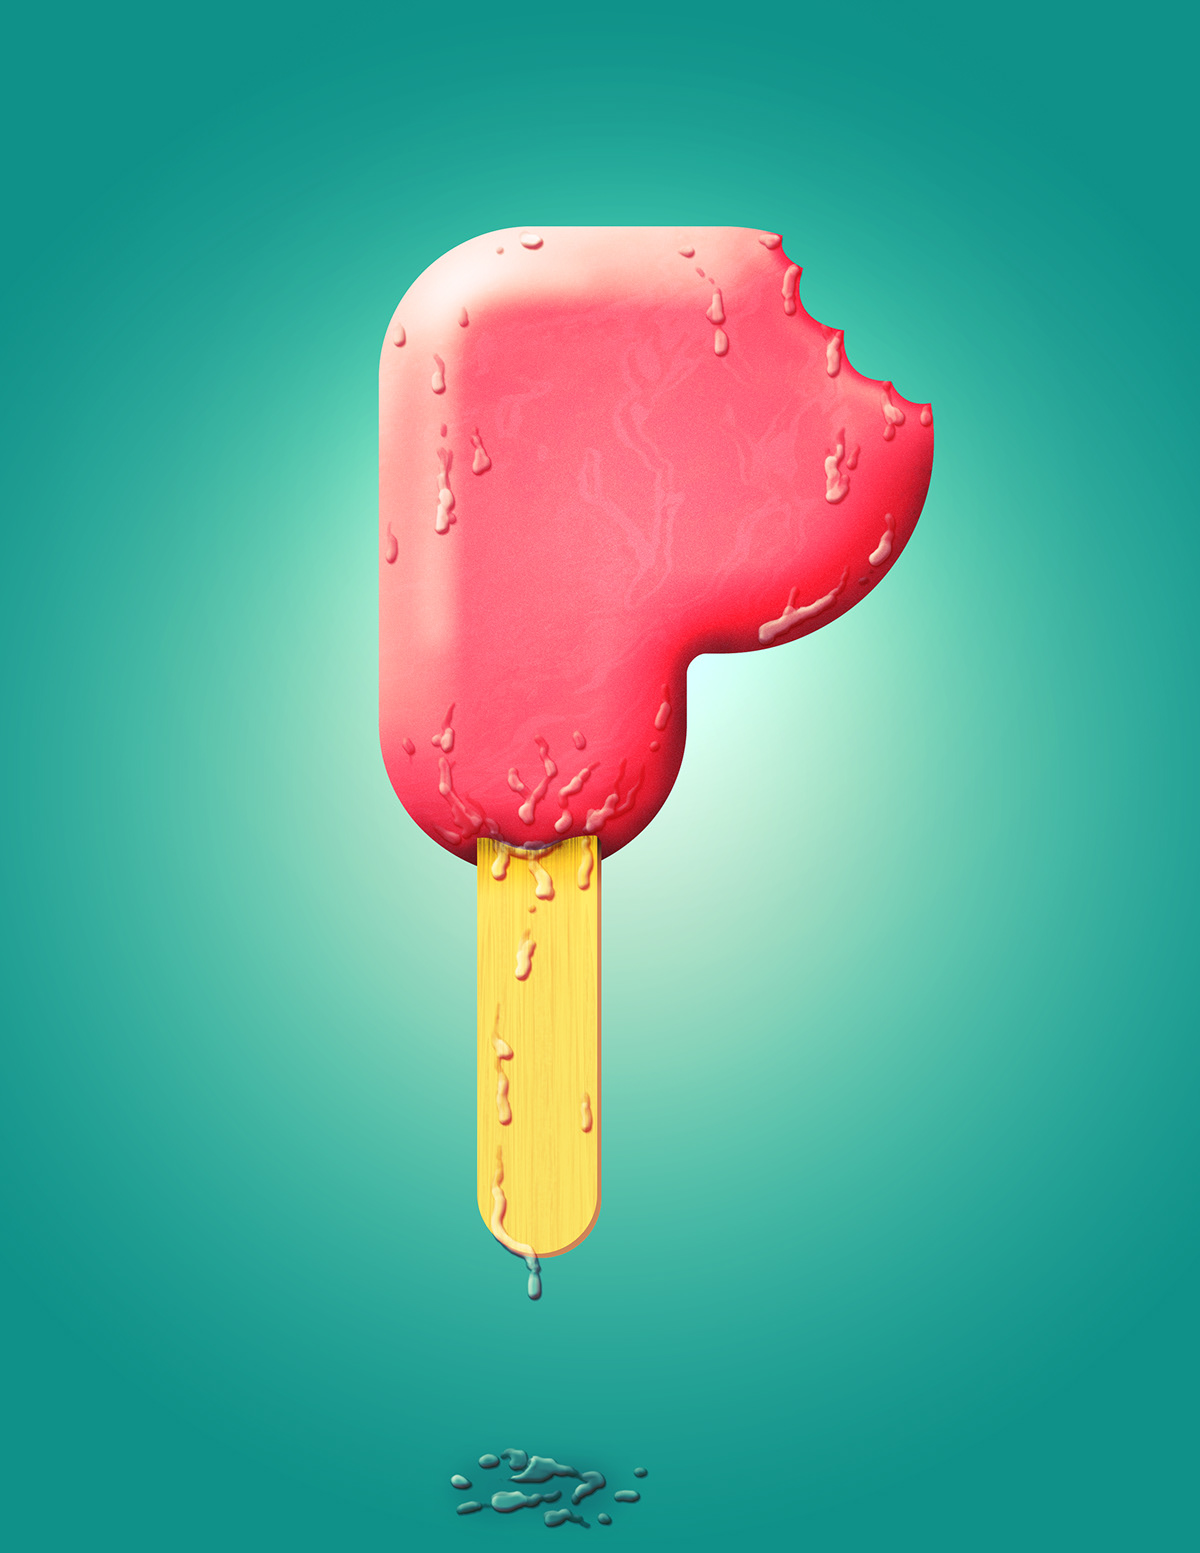 Expressive Type  expressive  popsicle   letterform  letter P  type